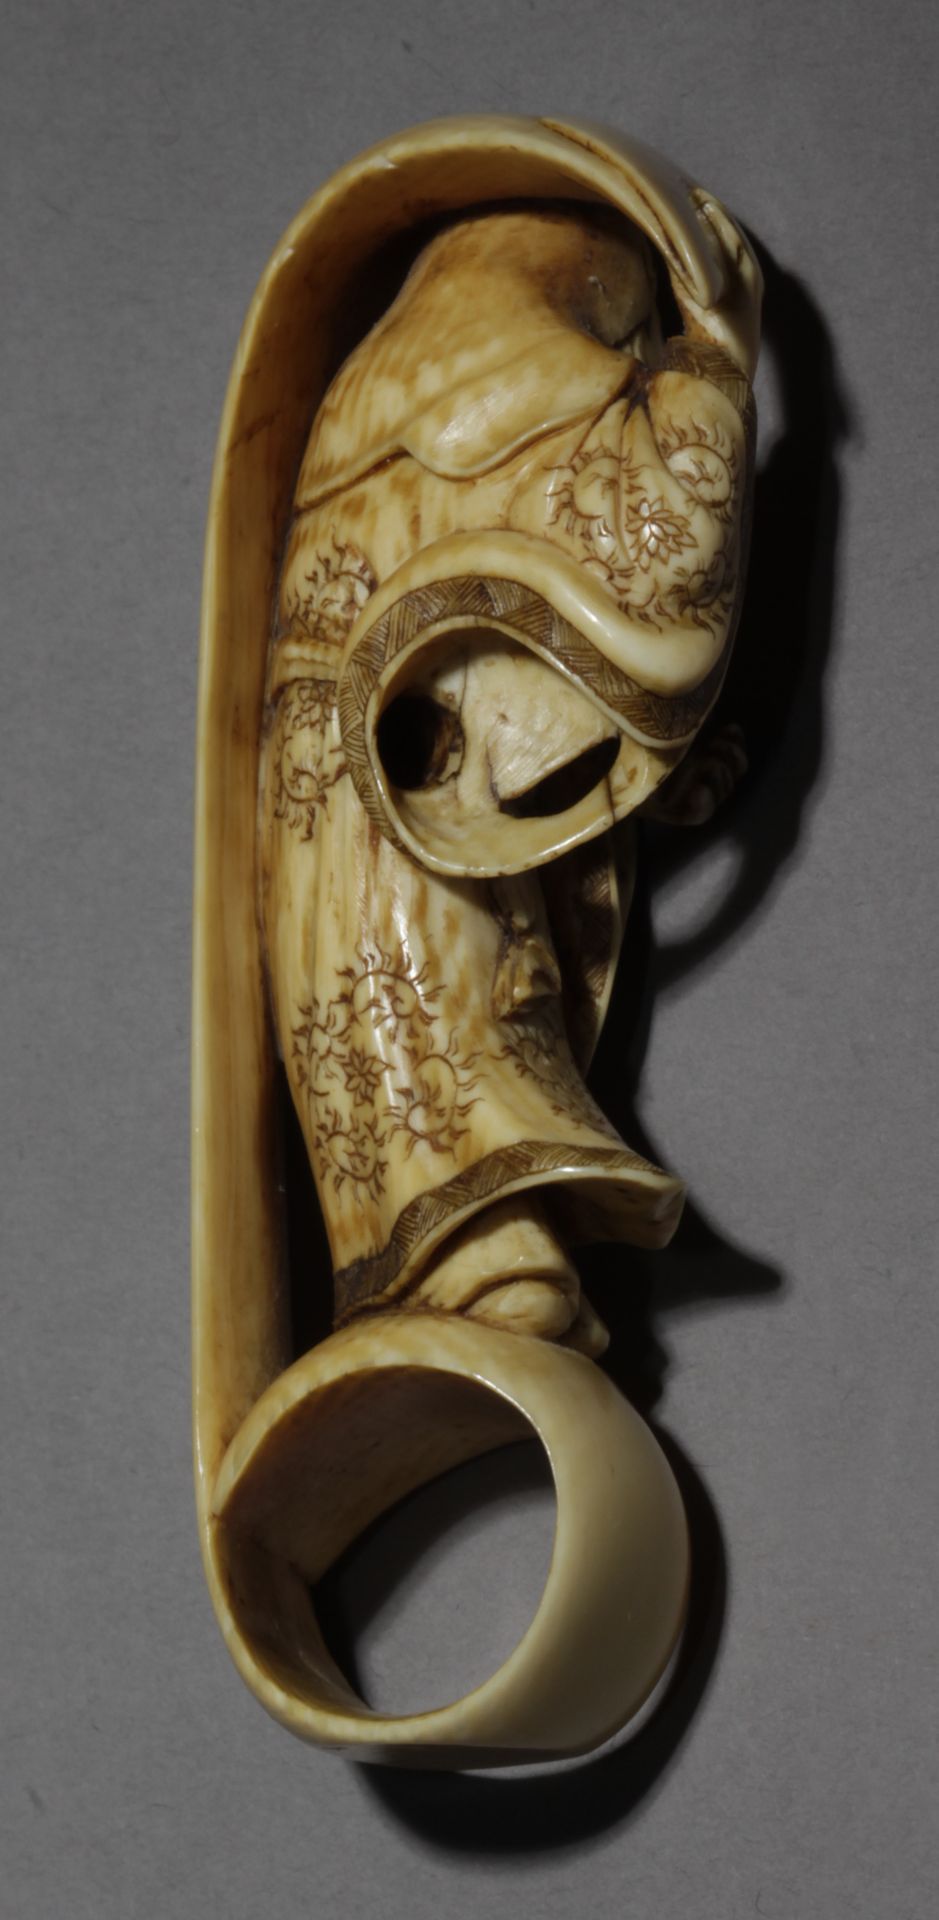 A mid 19th century Japanese netsuke from late Edo period - Image 6 of 7